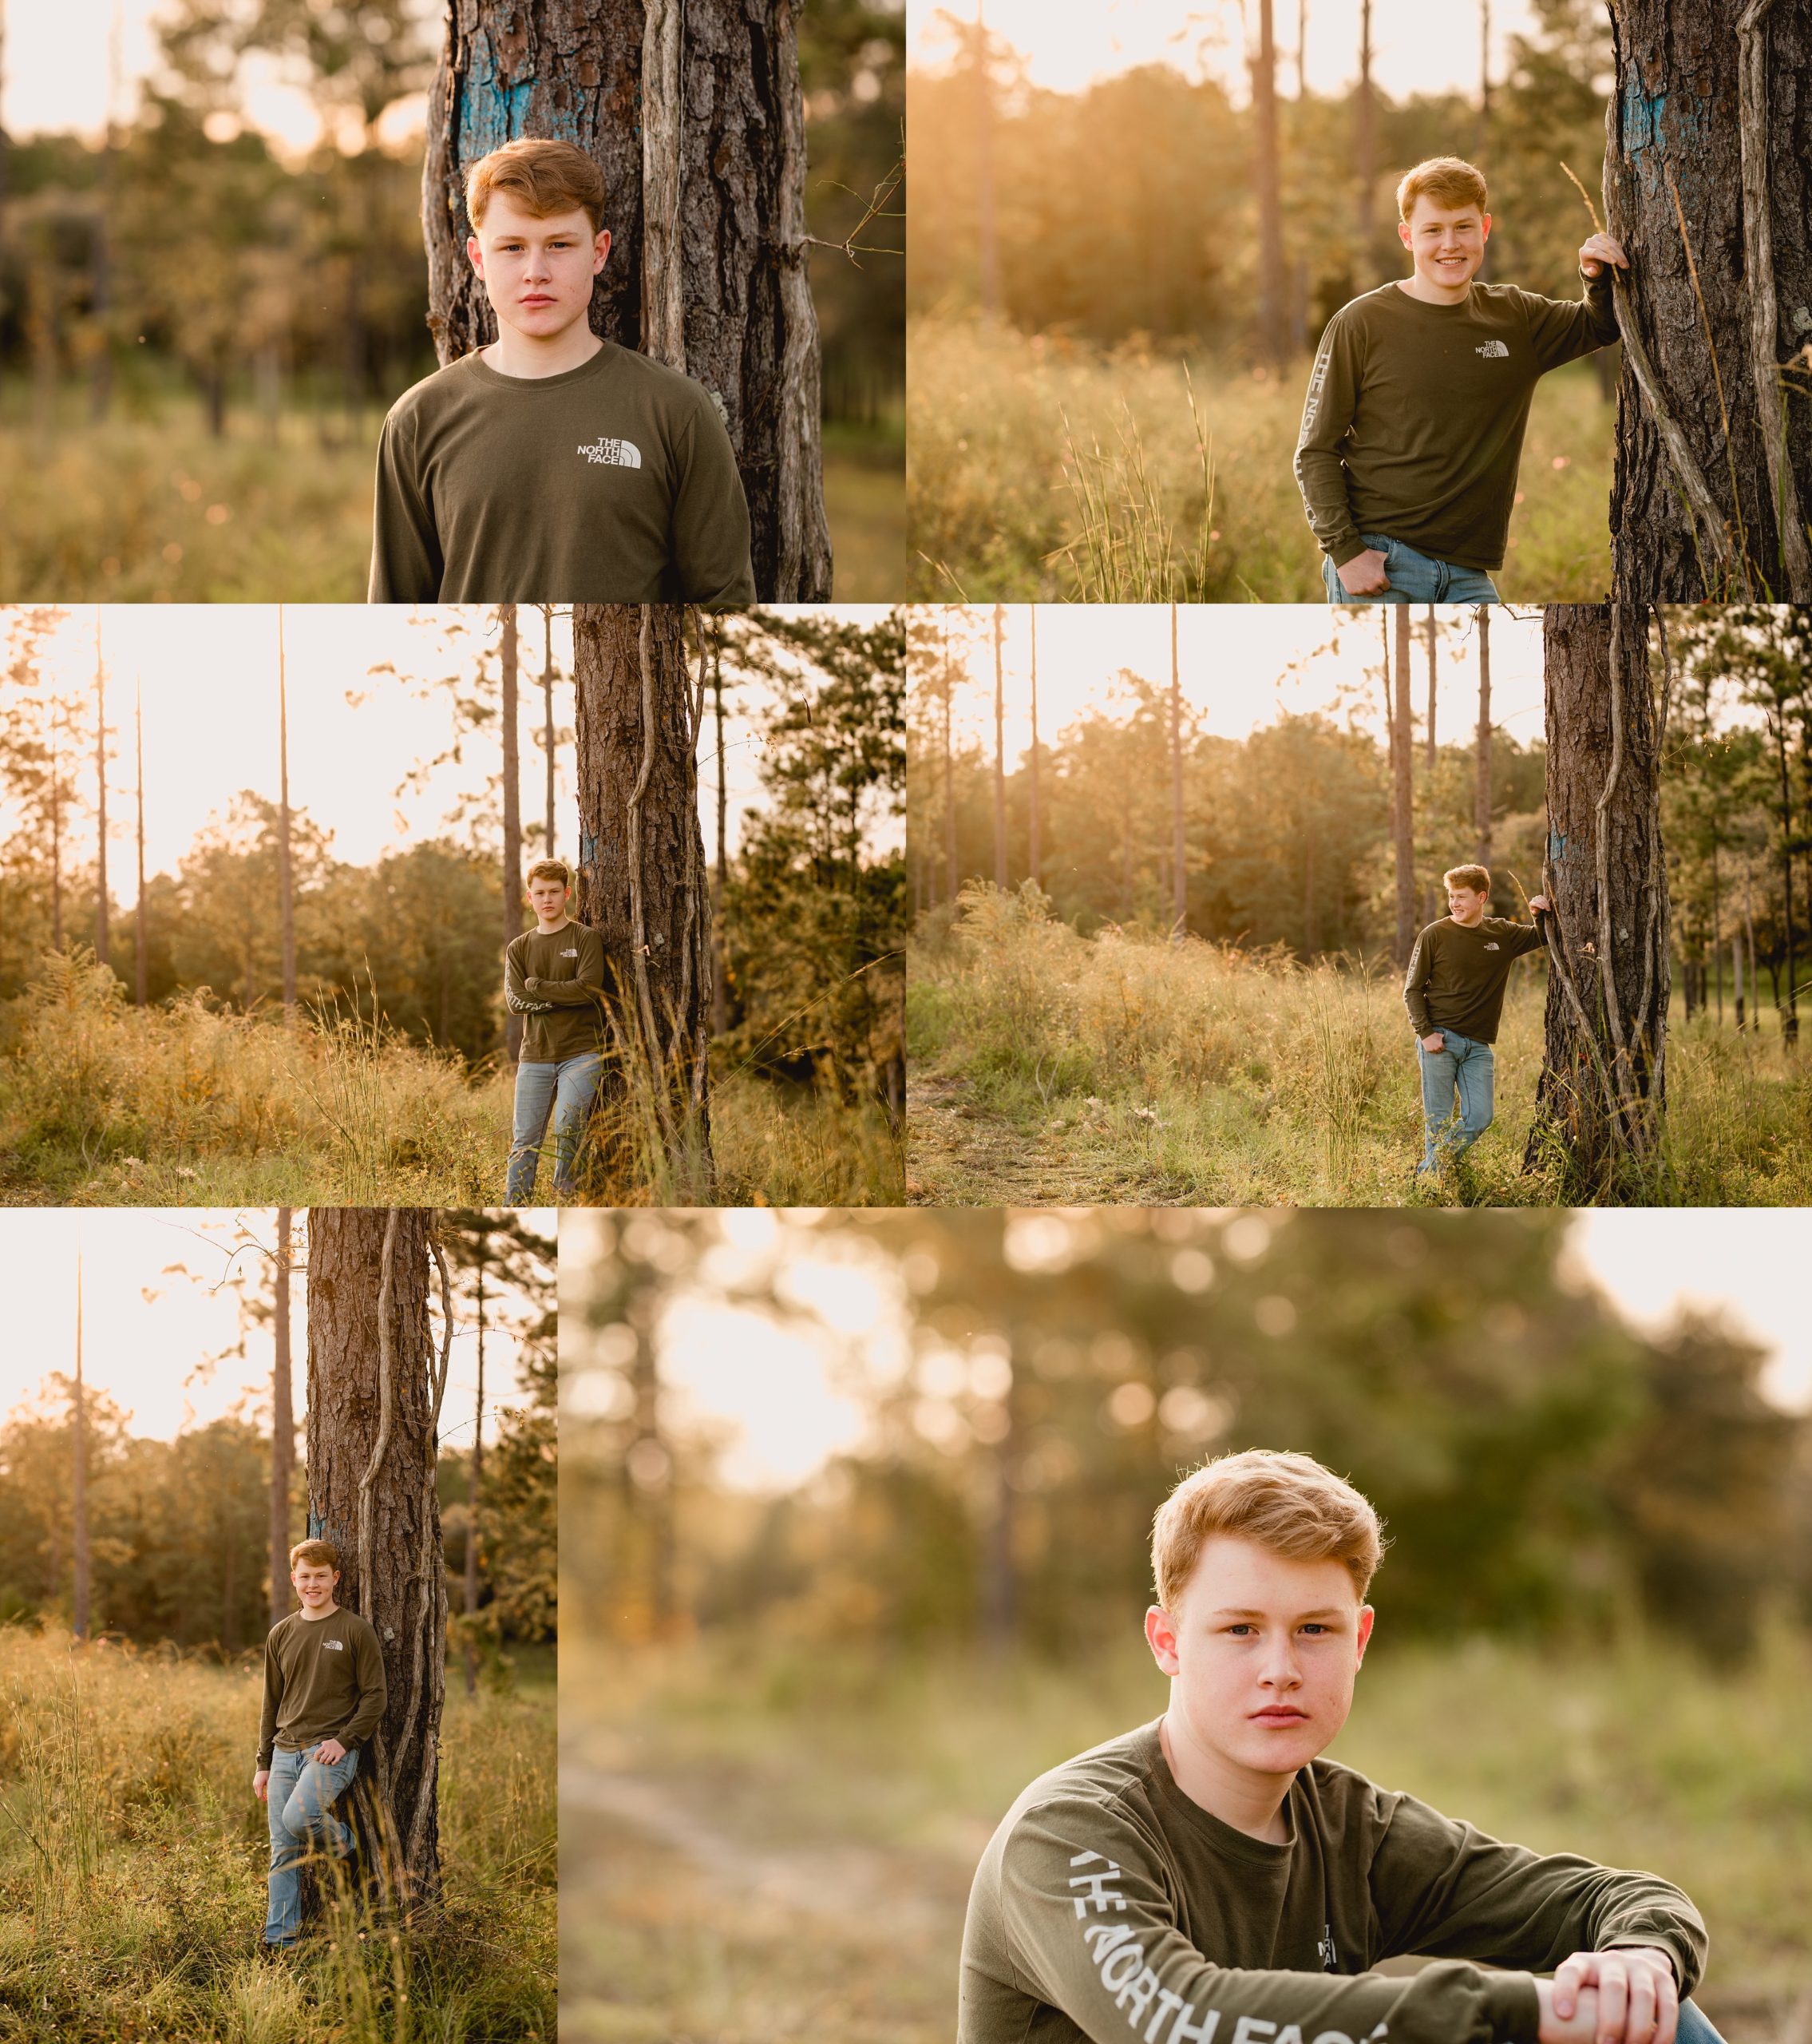 Senior pictures in the forest in Florida at sunset. Golden hour. Senior boy photo ideas.